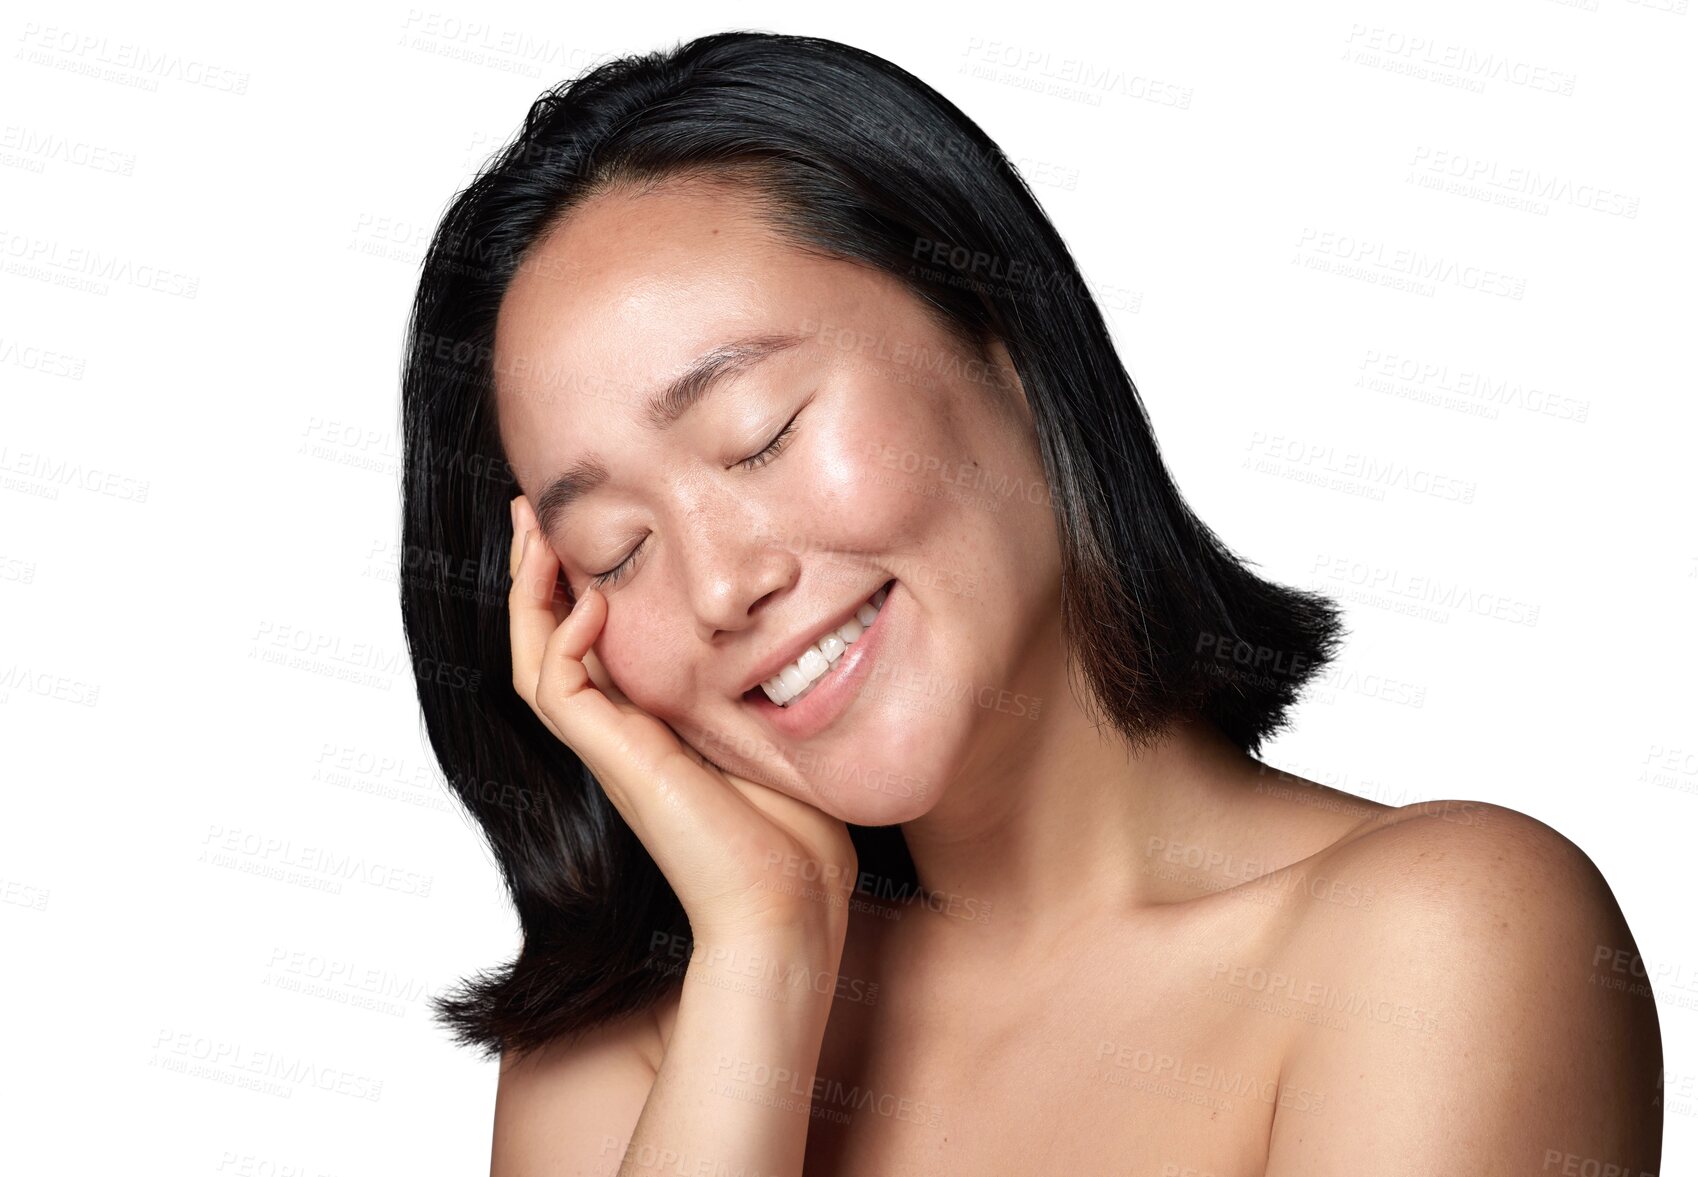 Buy stock photo Beauty, skincare and smile with face of asian woman on transparent background for cosmetic, spa or self care. Natural, wellness and health with female person isolated on png for dermatology treatment